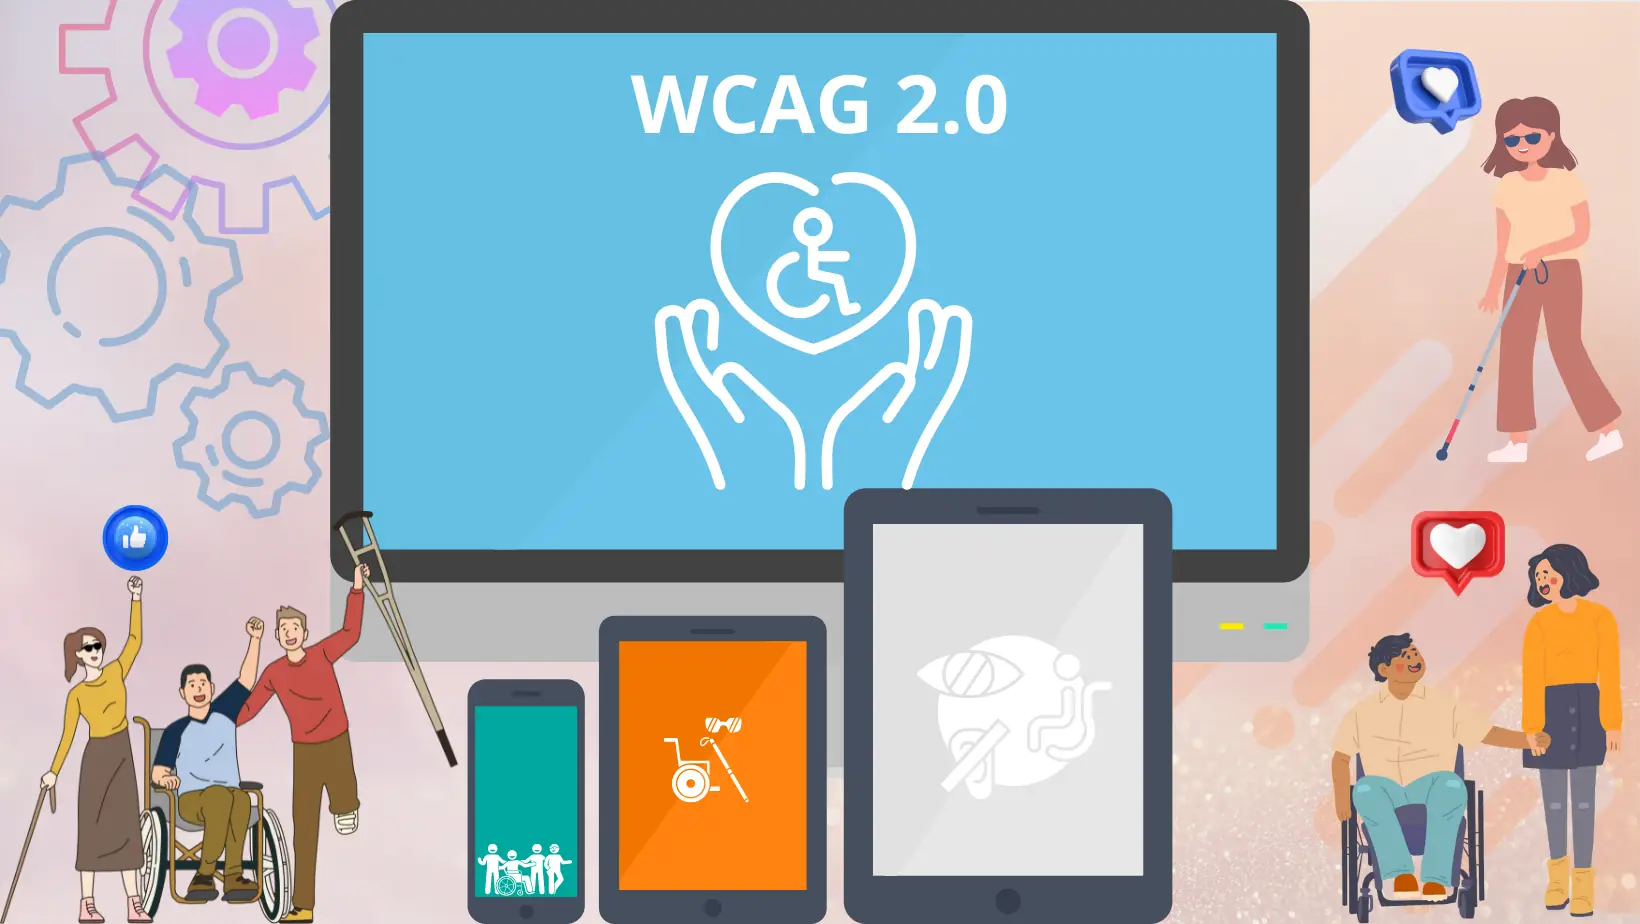 WCAG 2.0 Accessibility for People with Disabilities